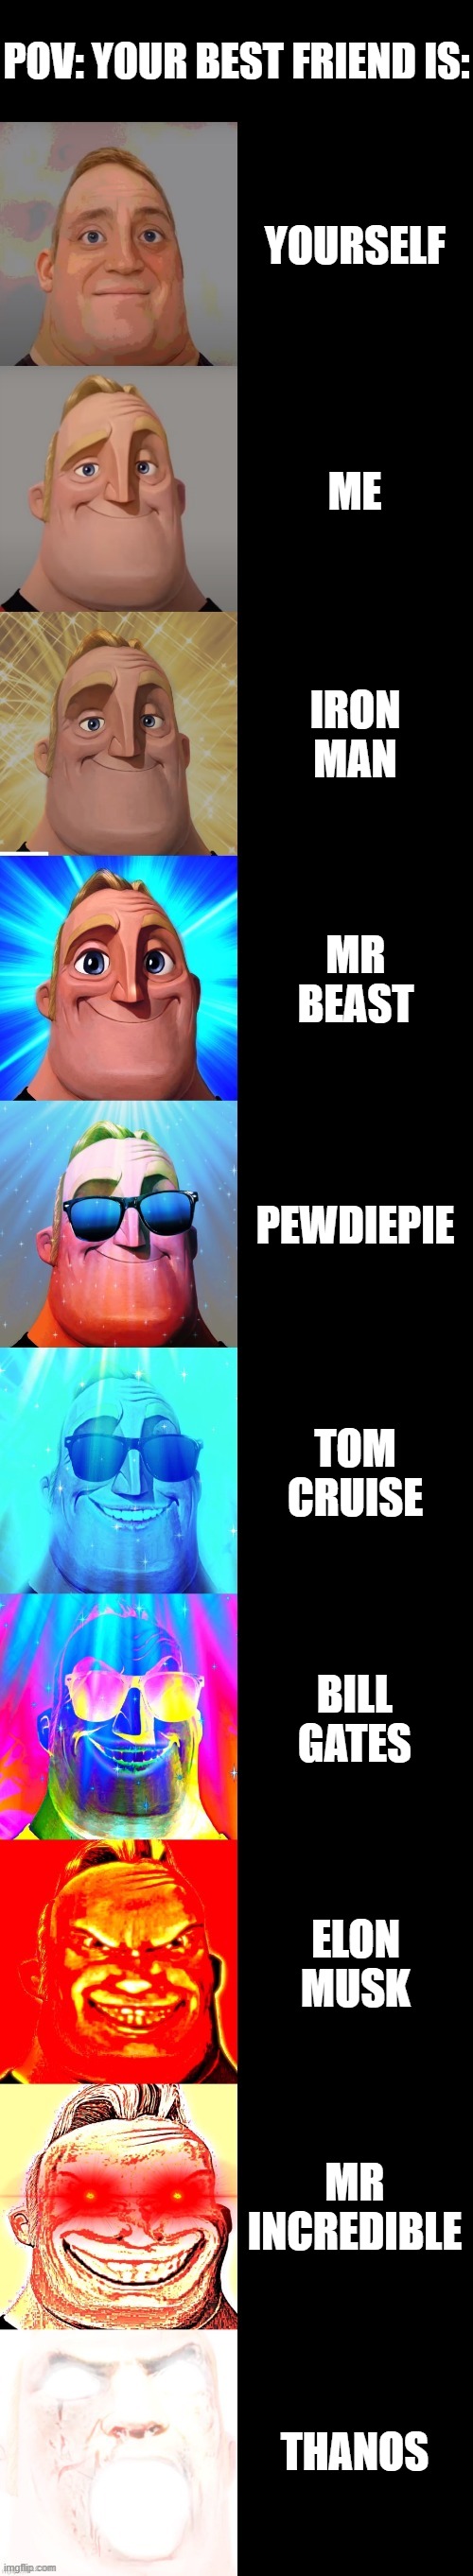 Mr incredible becoming canny POV: your best friend is: (fixed) | POV: YOUR BEST FRIEND IS:; YOURSELF; ME; IRON MAN; MR BEAST; PEWDIEPIE; TOM CRUISE; BILL GATES; ELON MUSK; MR INCREDIBLE; THANOS | image tagged in mr incredible becoming canny | made w/ Imgflip meme maker